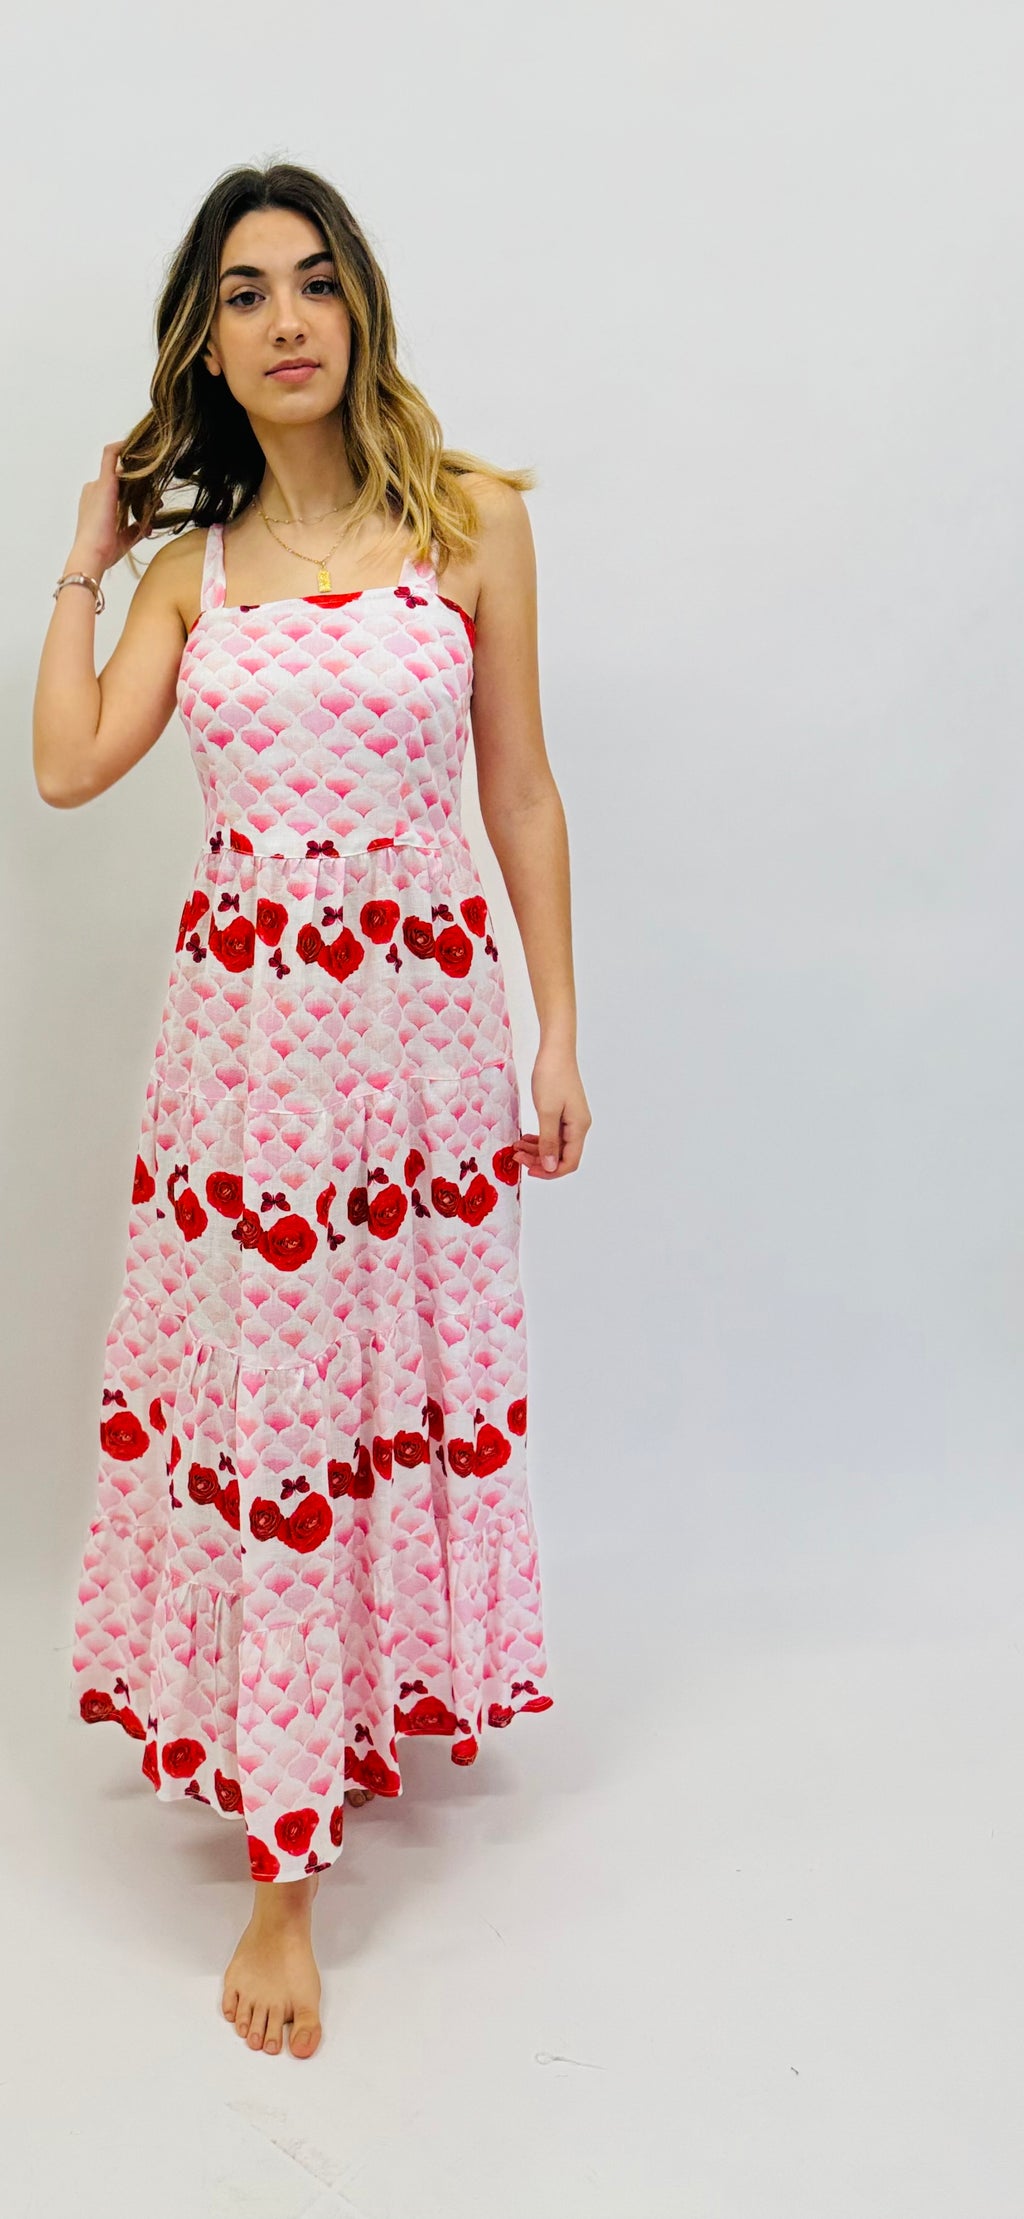 DRESS DOLCE IN LOVELY PINKS AND ROSES PRINTS